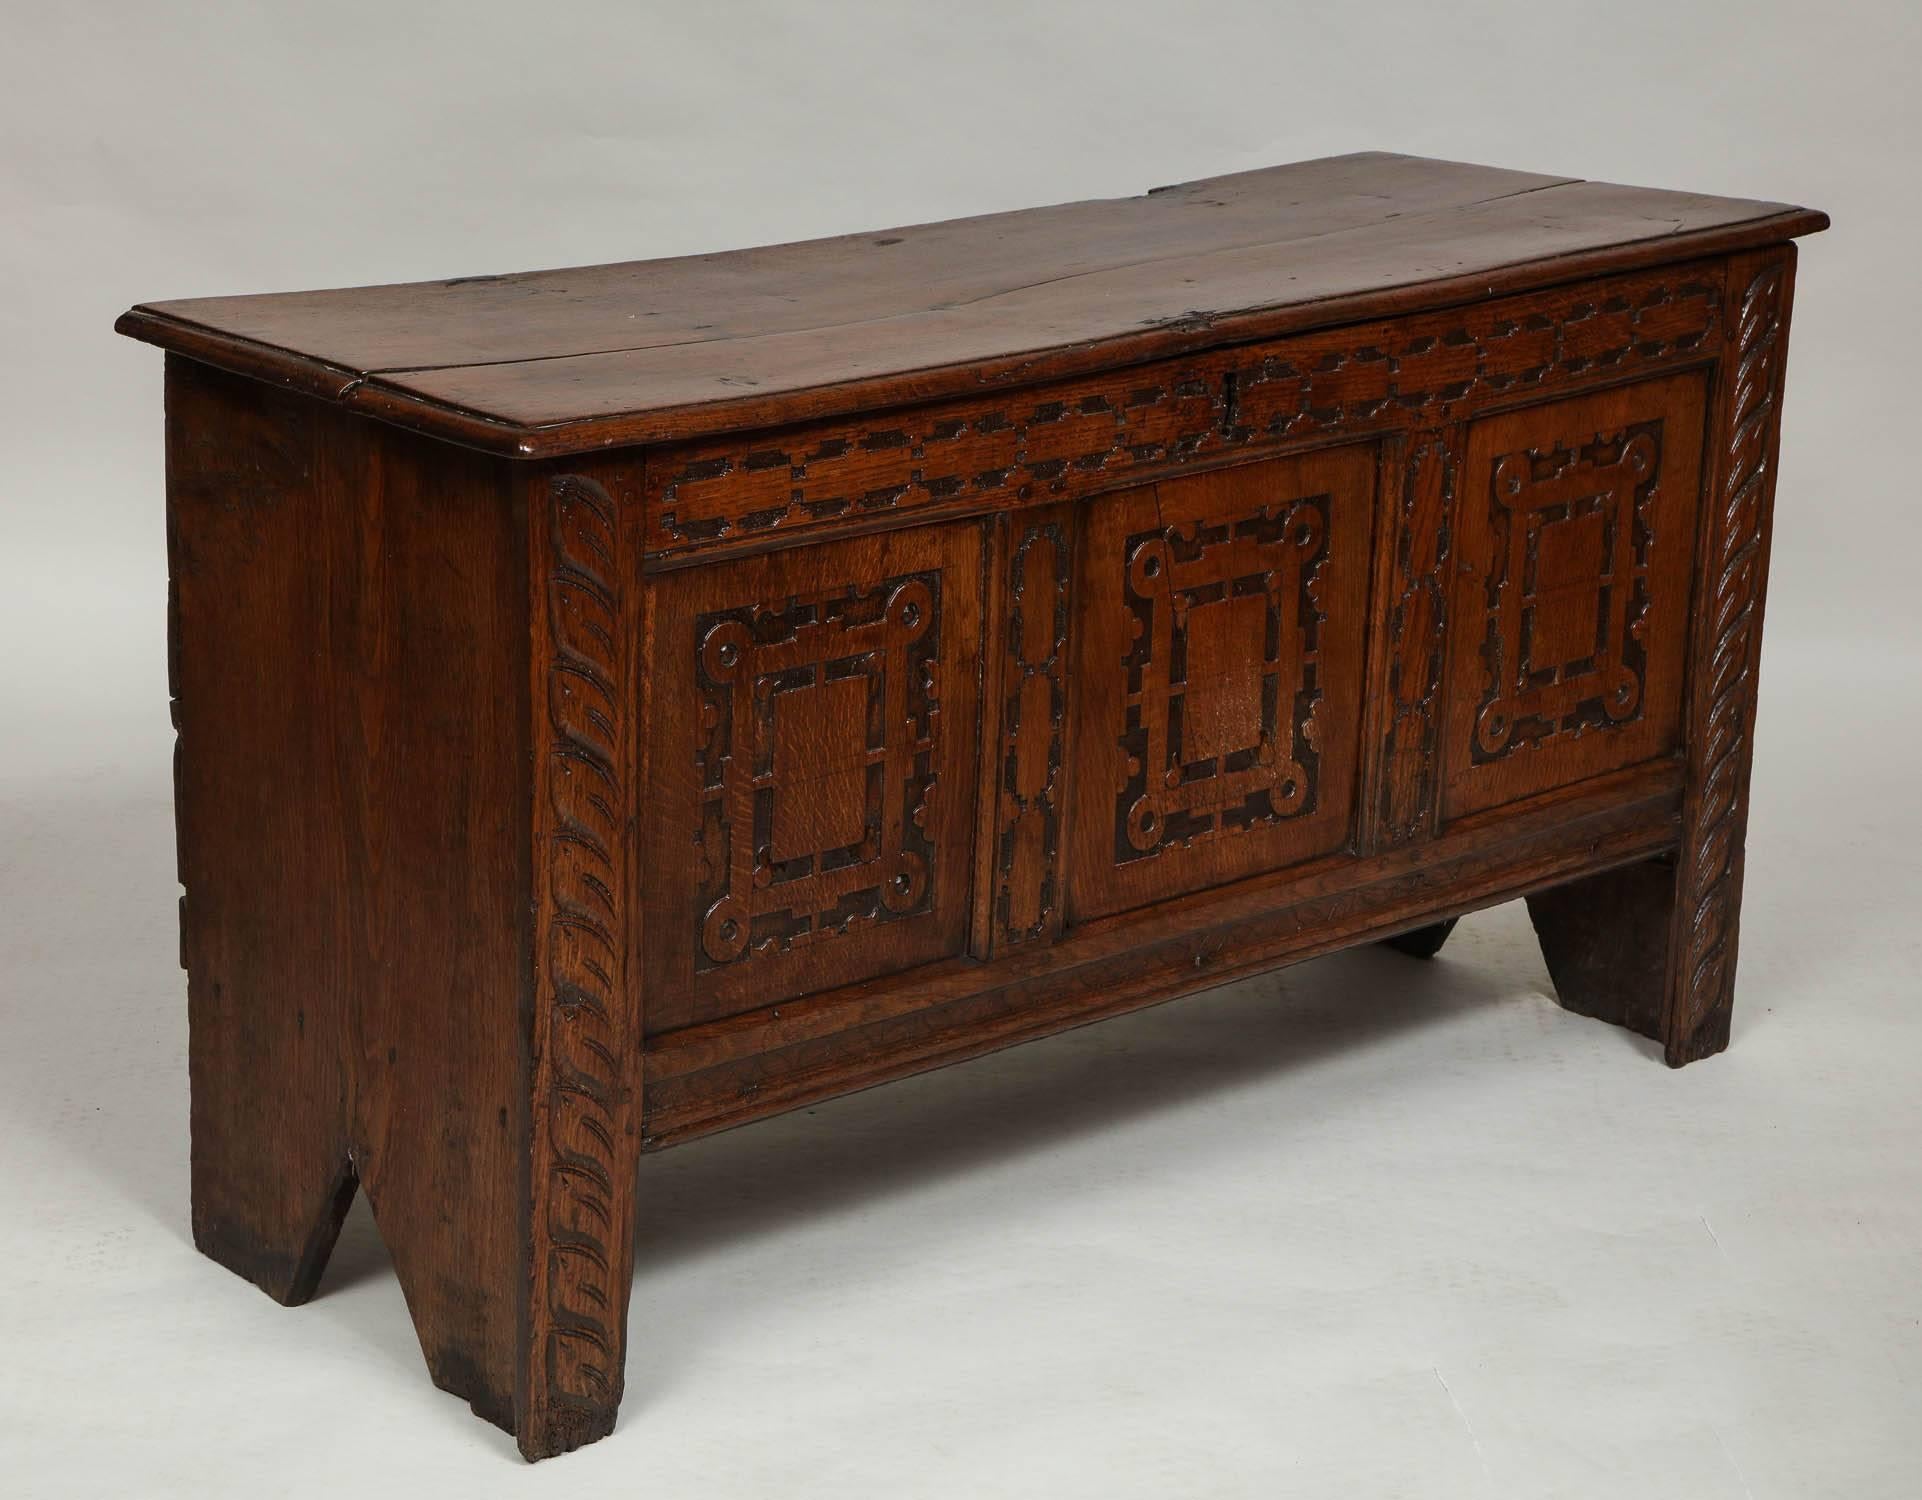 Fine 17th century English oak coffer, the two plank top with thumb molded edge over slab sides with bootjack feet, the front of panelled construction having geometric carved panels and rails, the stiles with foliate details, retaining 18th century